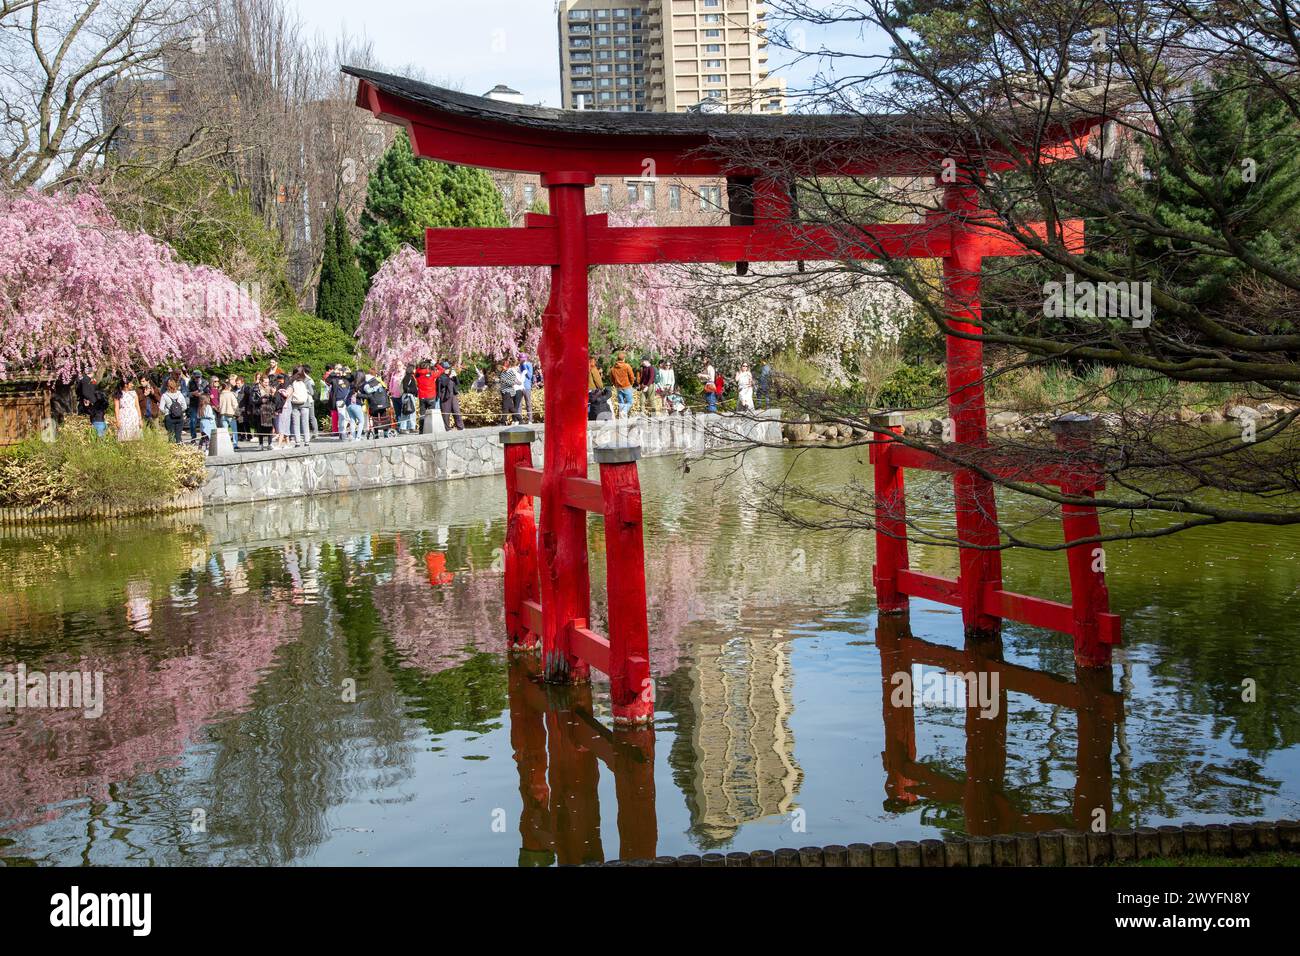 Early Spring at the Brooklyn Botanic Garden on Easter Sunday. Visitors enjoy the Higan cherries in bloom at the Japanese Garden and pond. Stock Photo